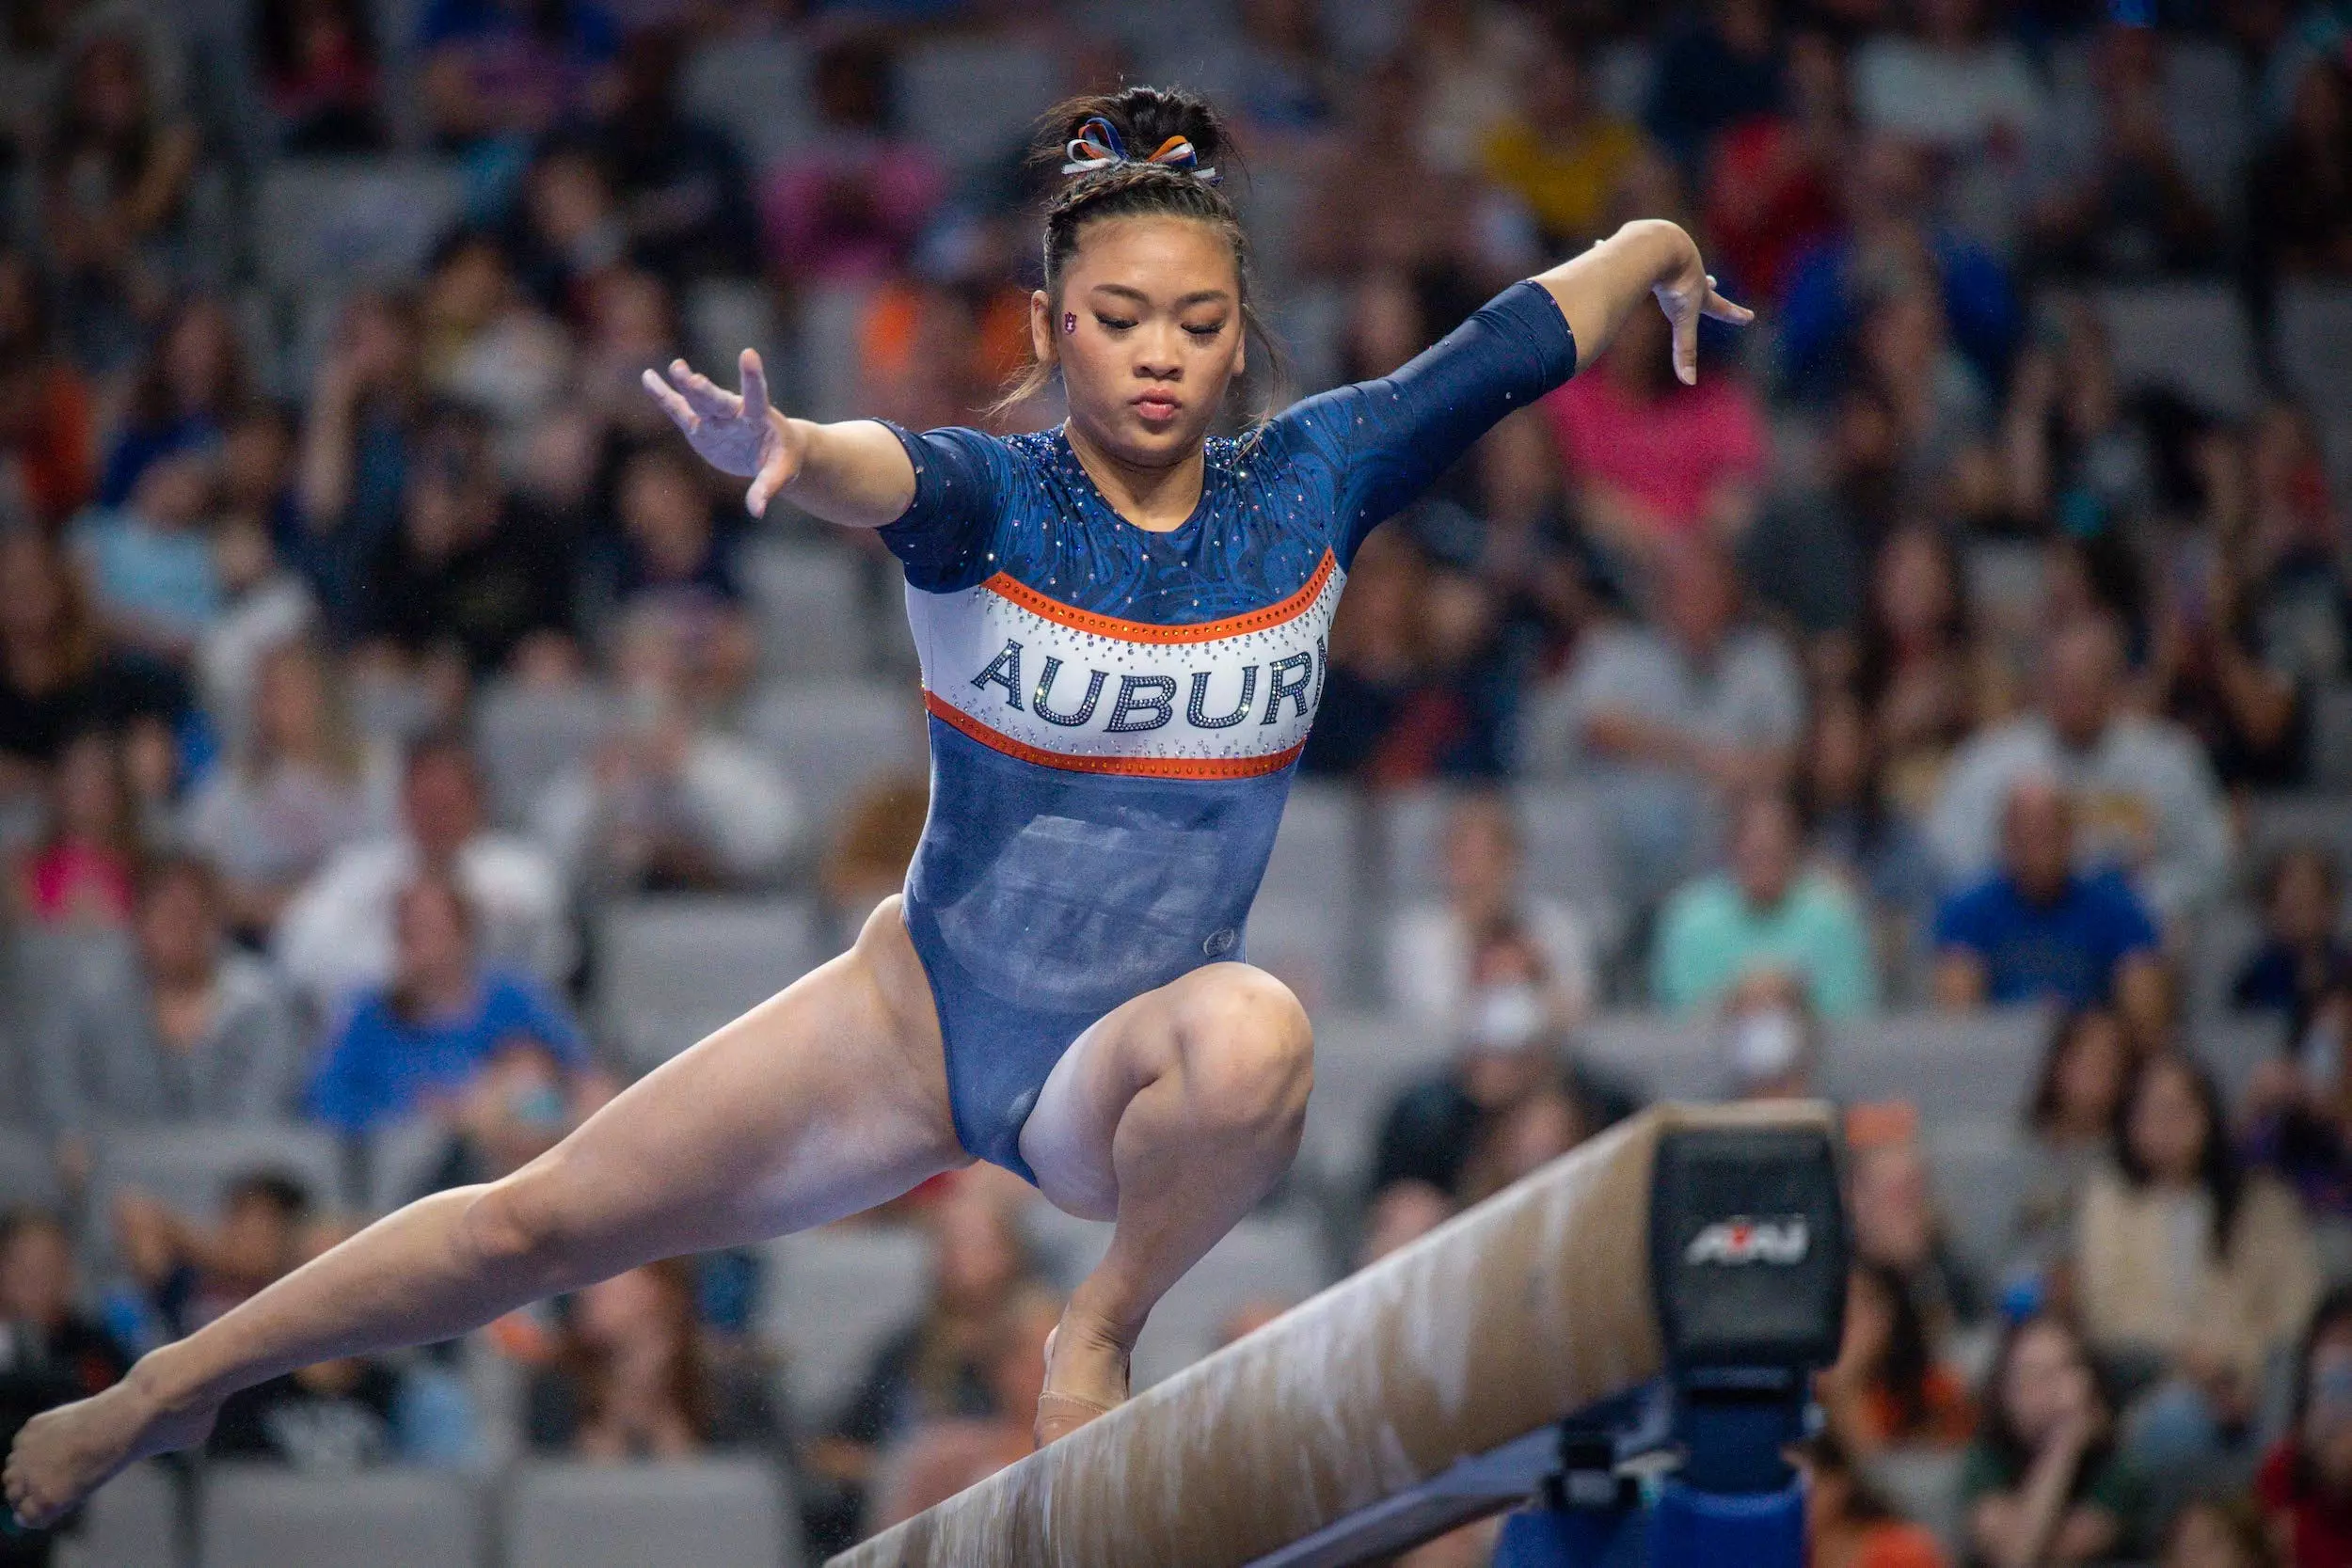 Olympic all-around champion Suni Lee competes for Auburn at the 2022 NCAA Women